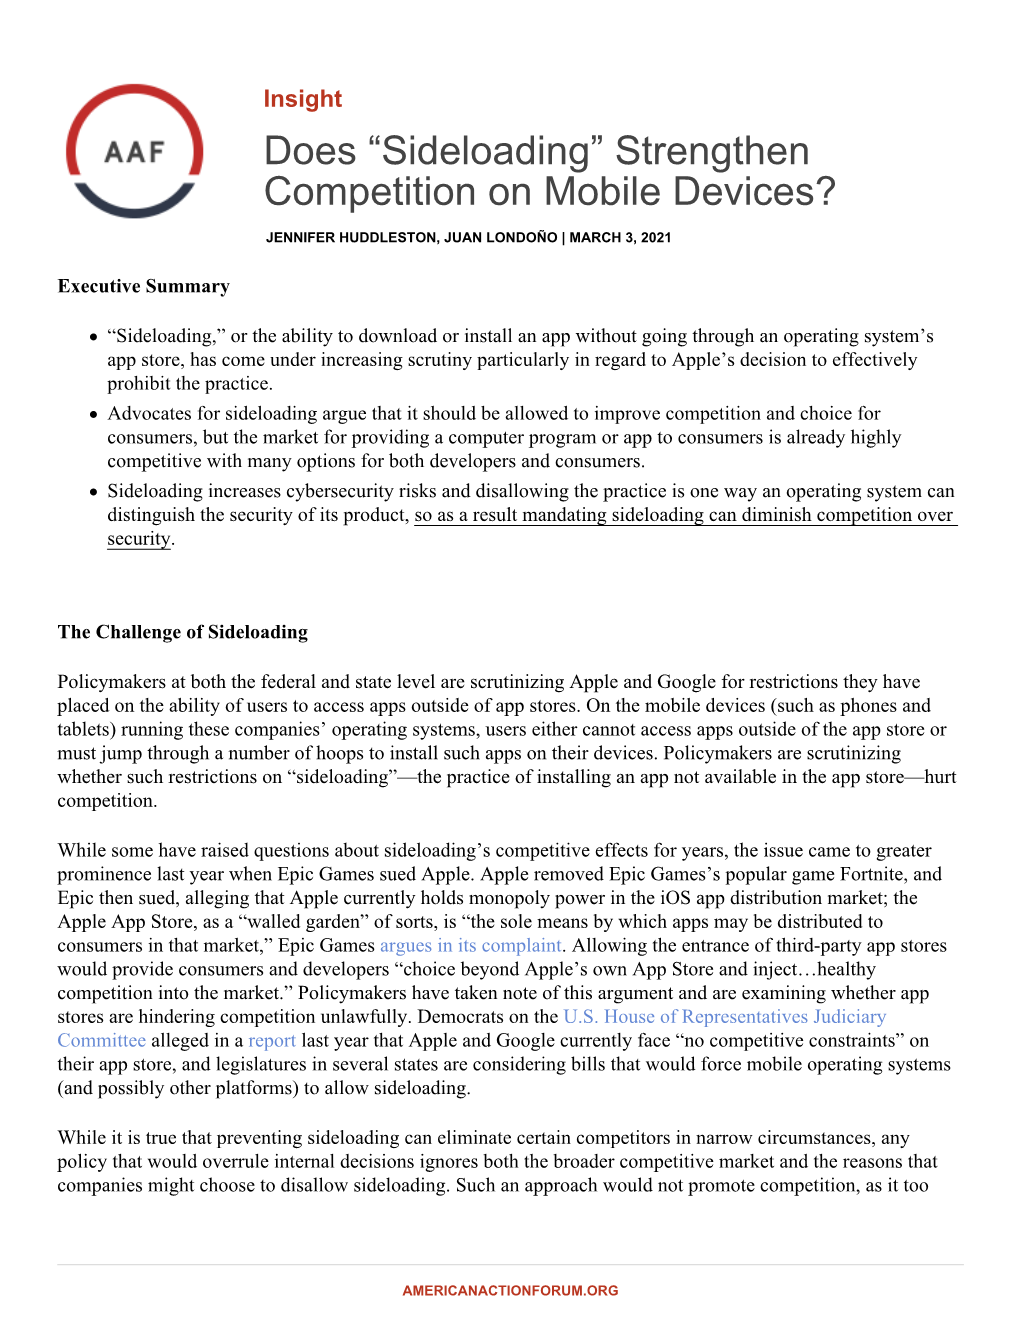 Sideloading” Strengthen Competition on Mobile Devices?